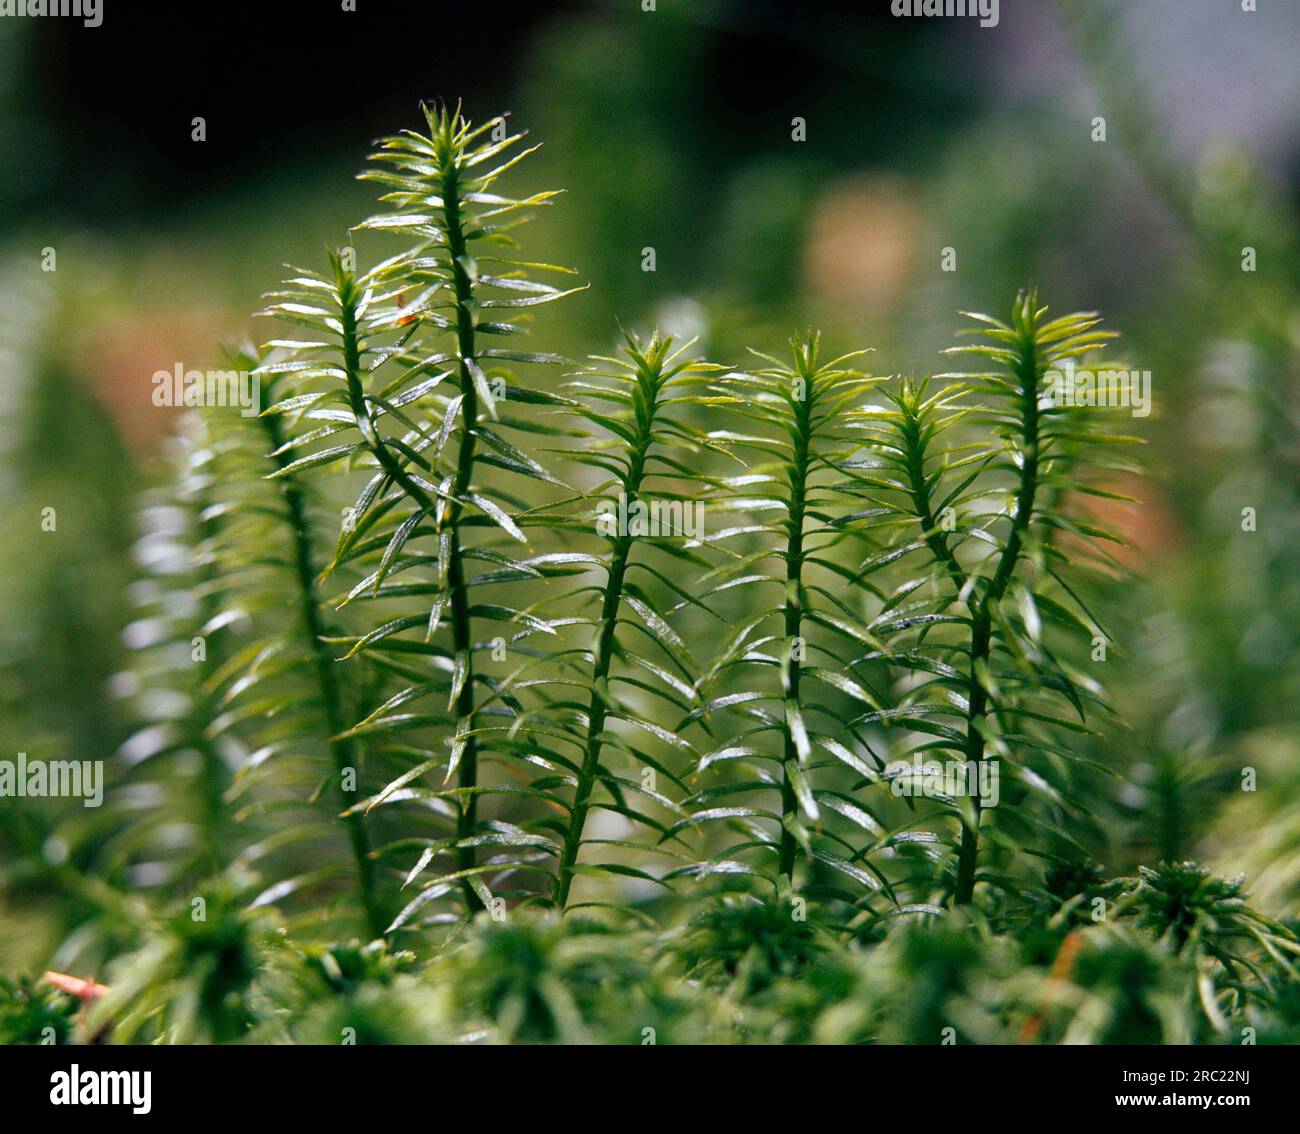 Interrupted club-moss) Stock Photo